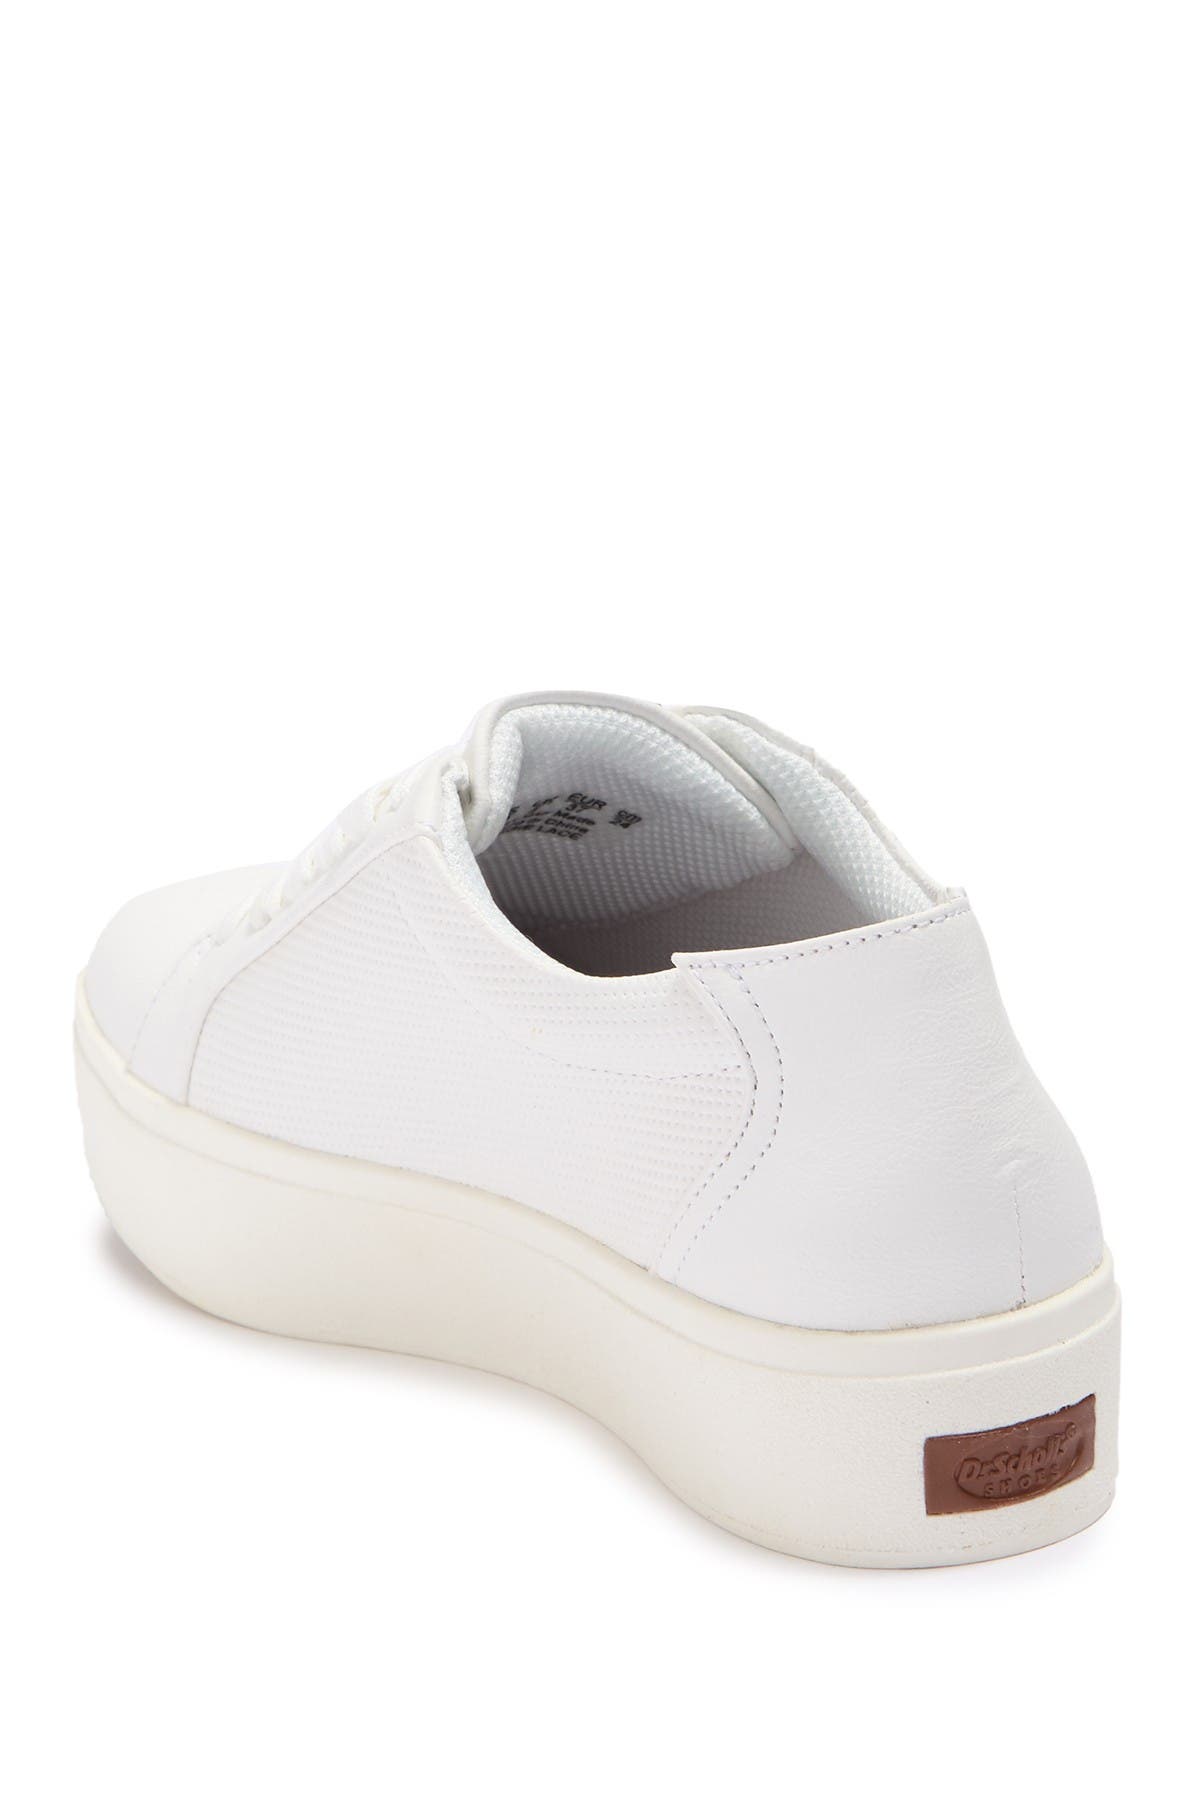 dr scholl's white platform sneakers